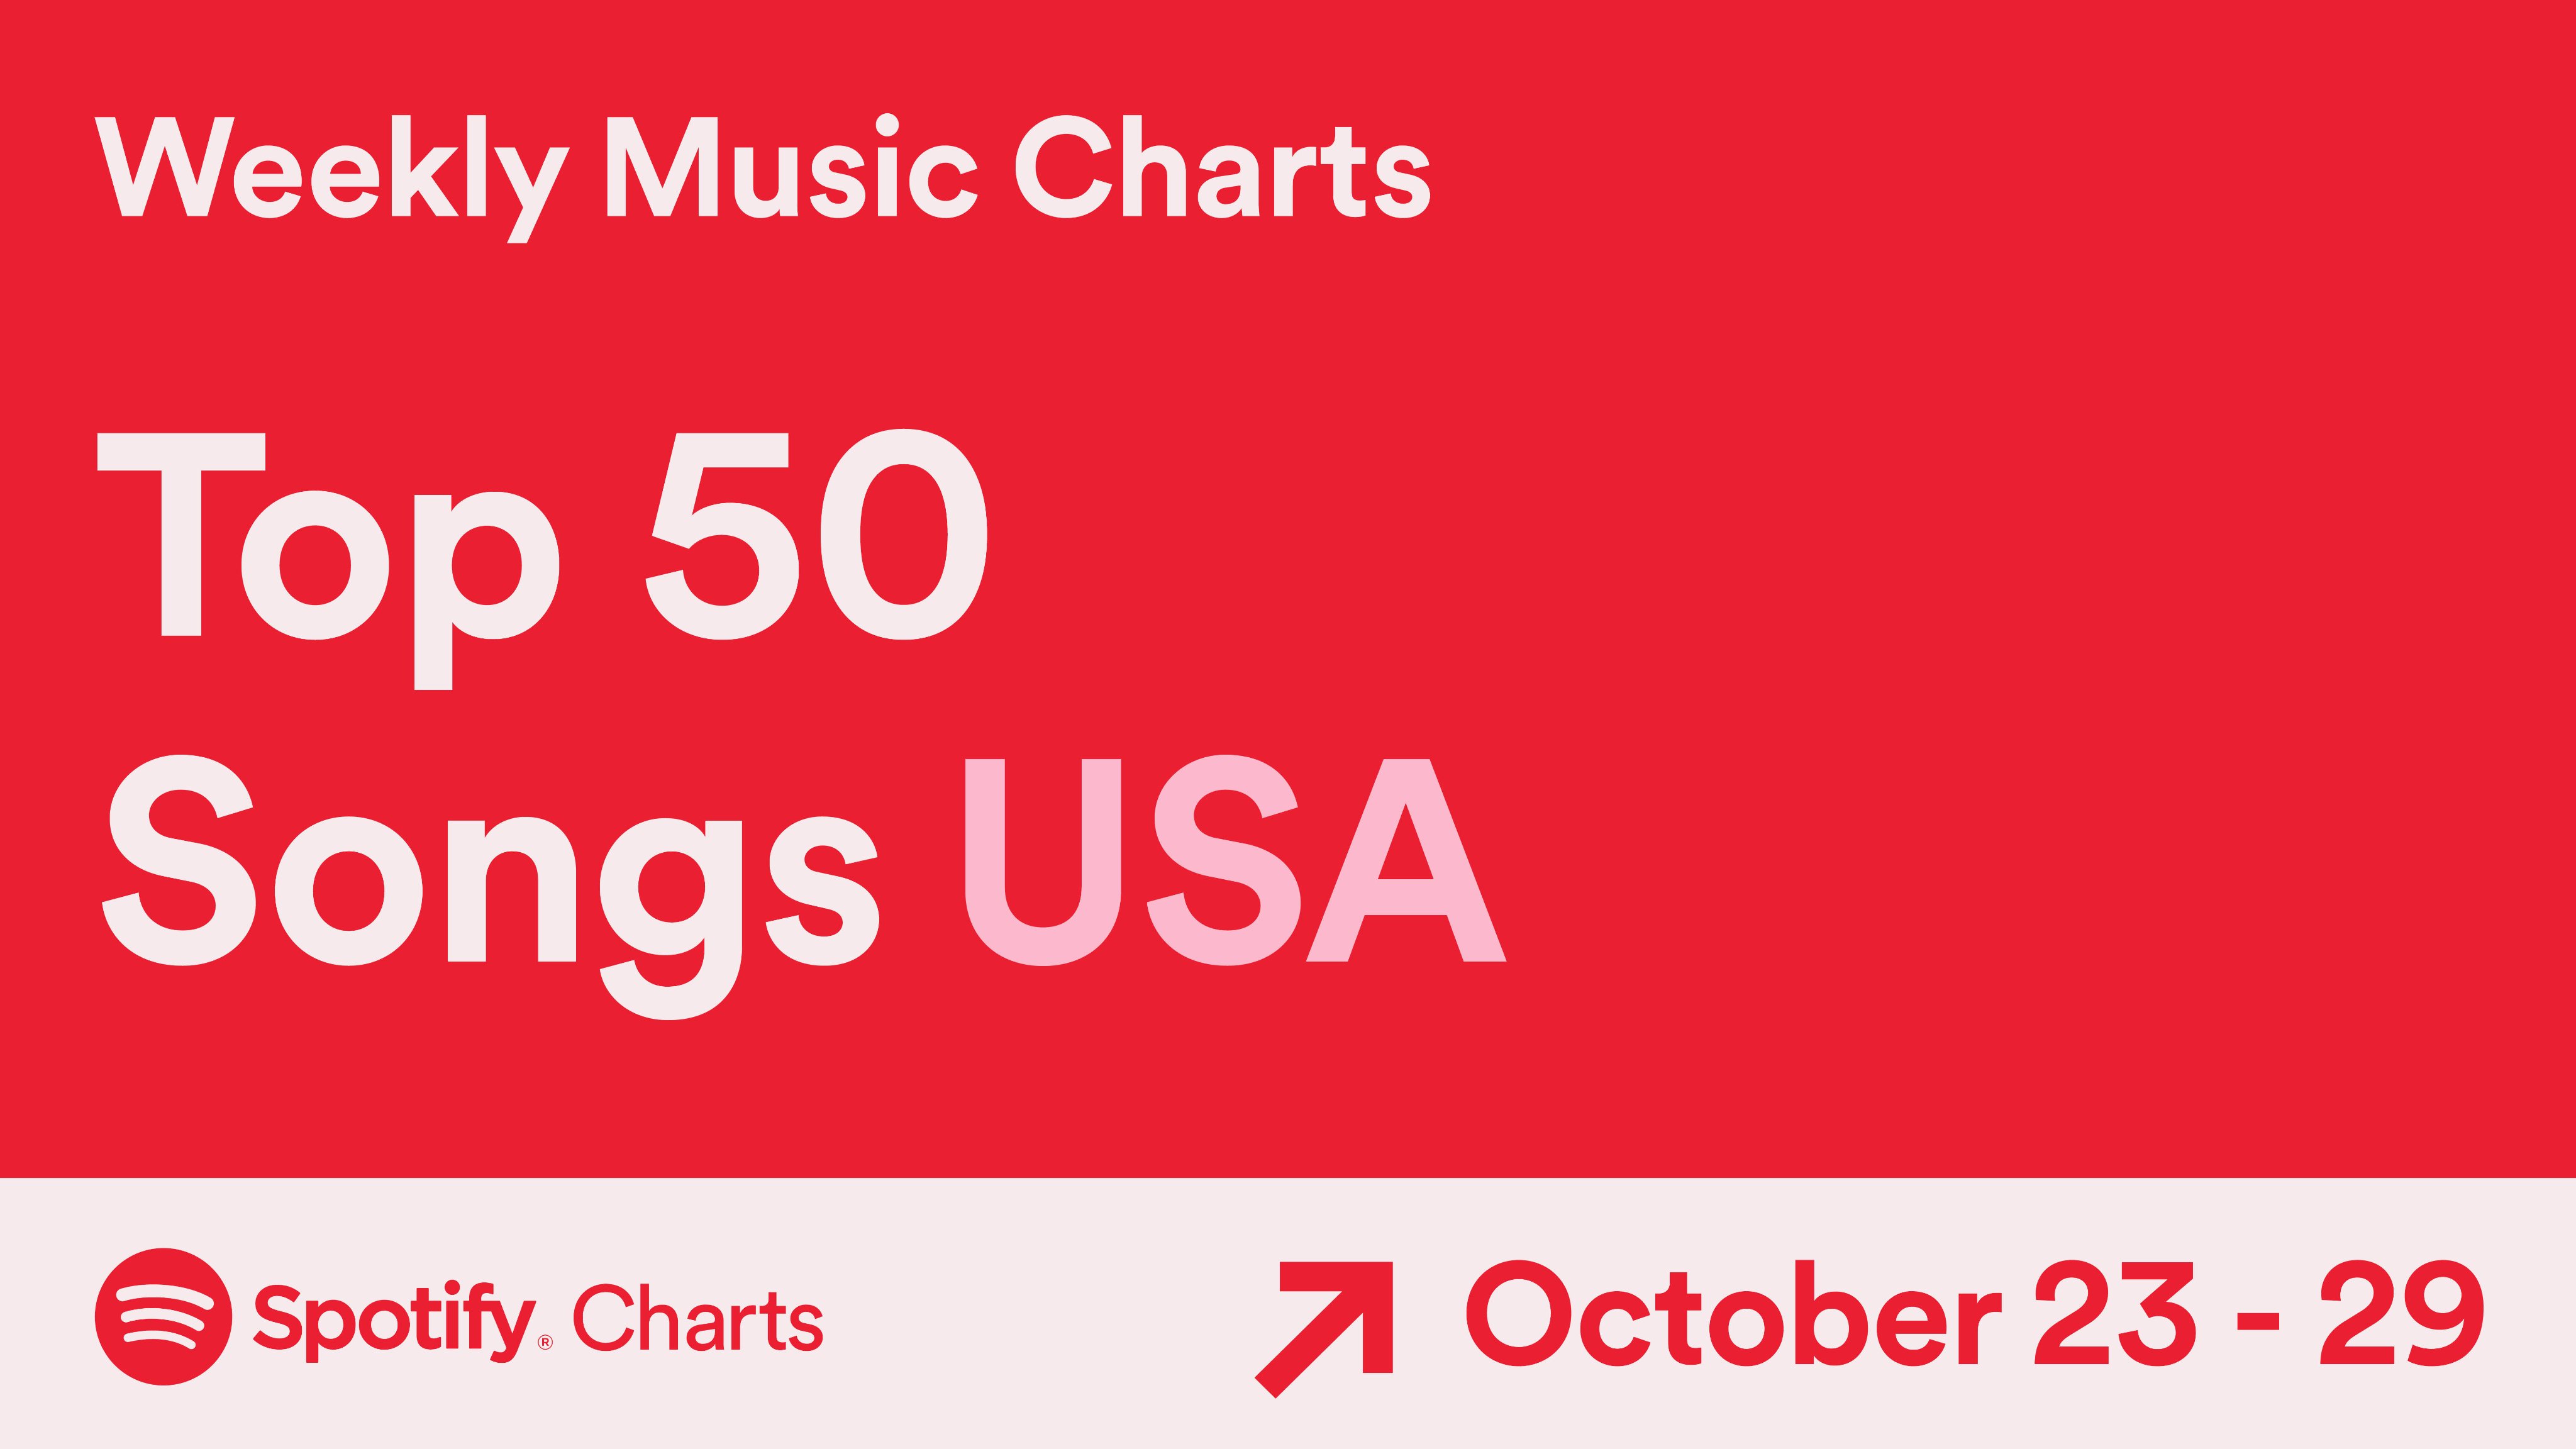 Charts on "❤️ Here are the Top 50 Songs streamed in the USA (Oct. 23-29, 2020) #SpotifyCharts https://t.co/FBf5iXnlXq" / Twitter